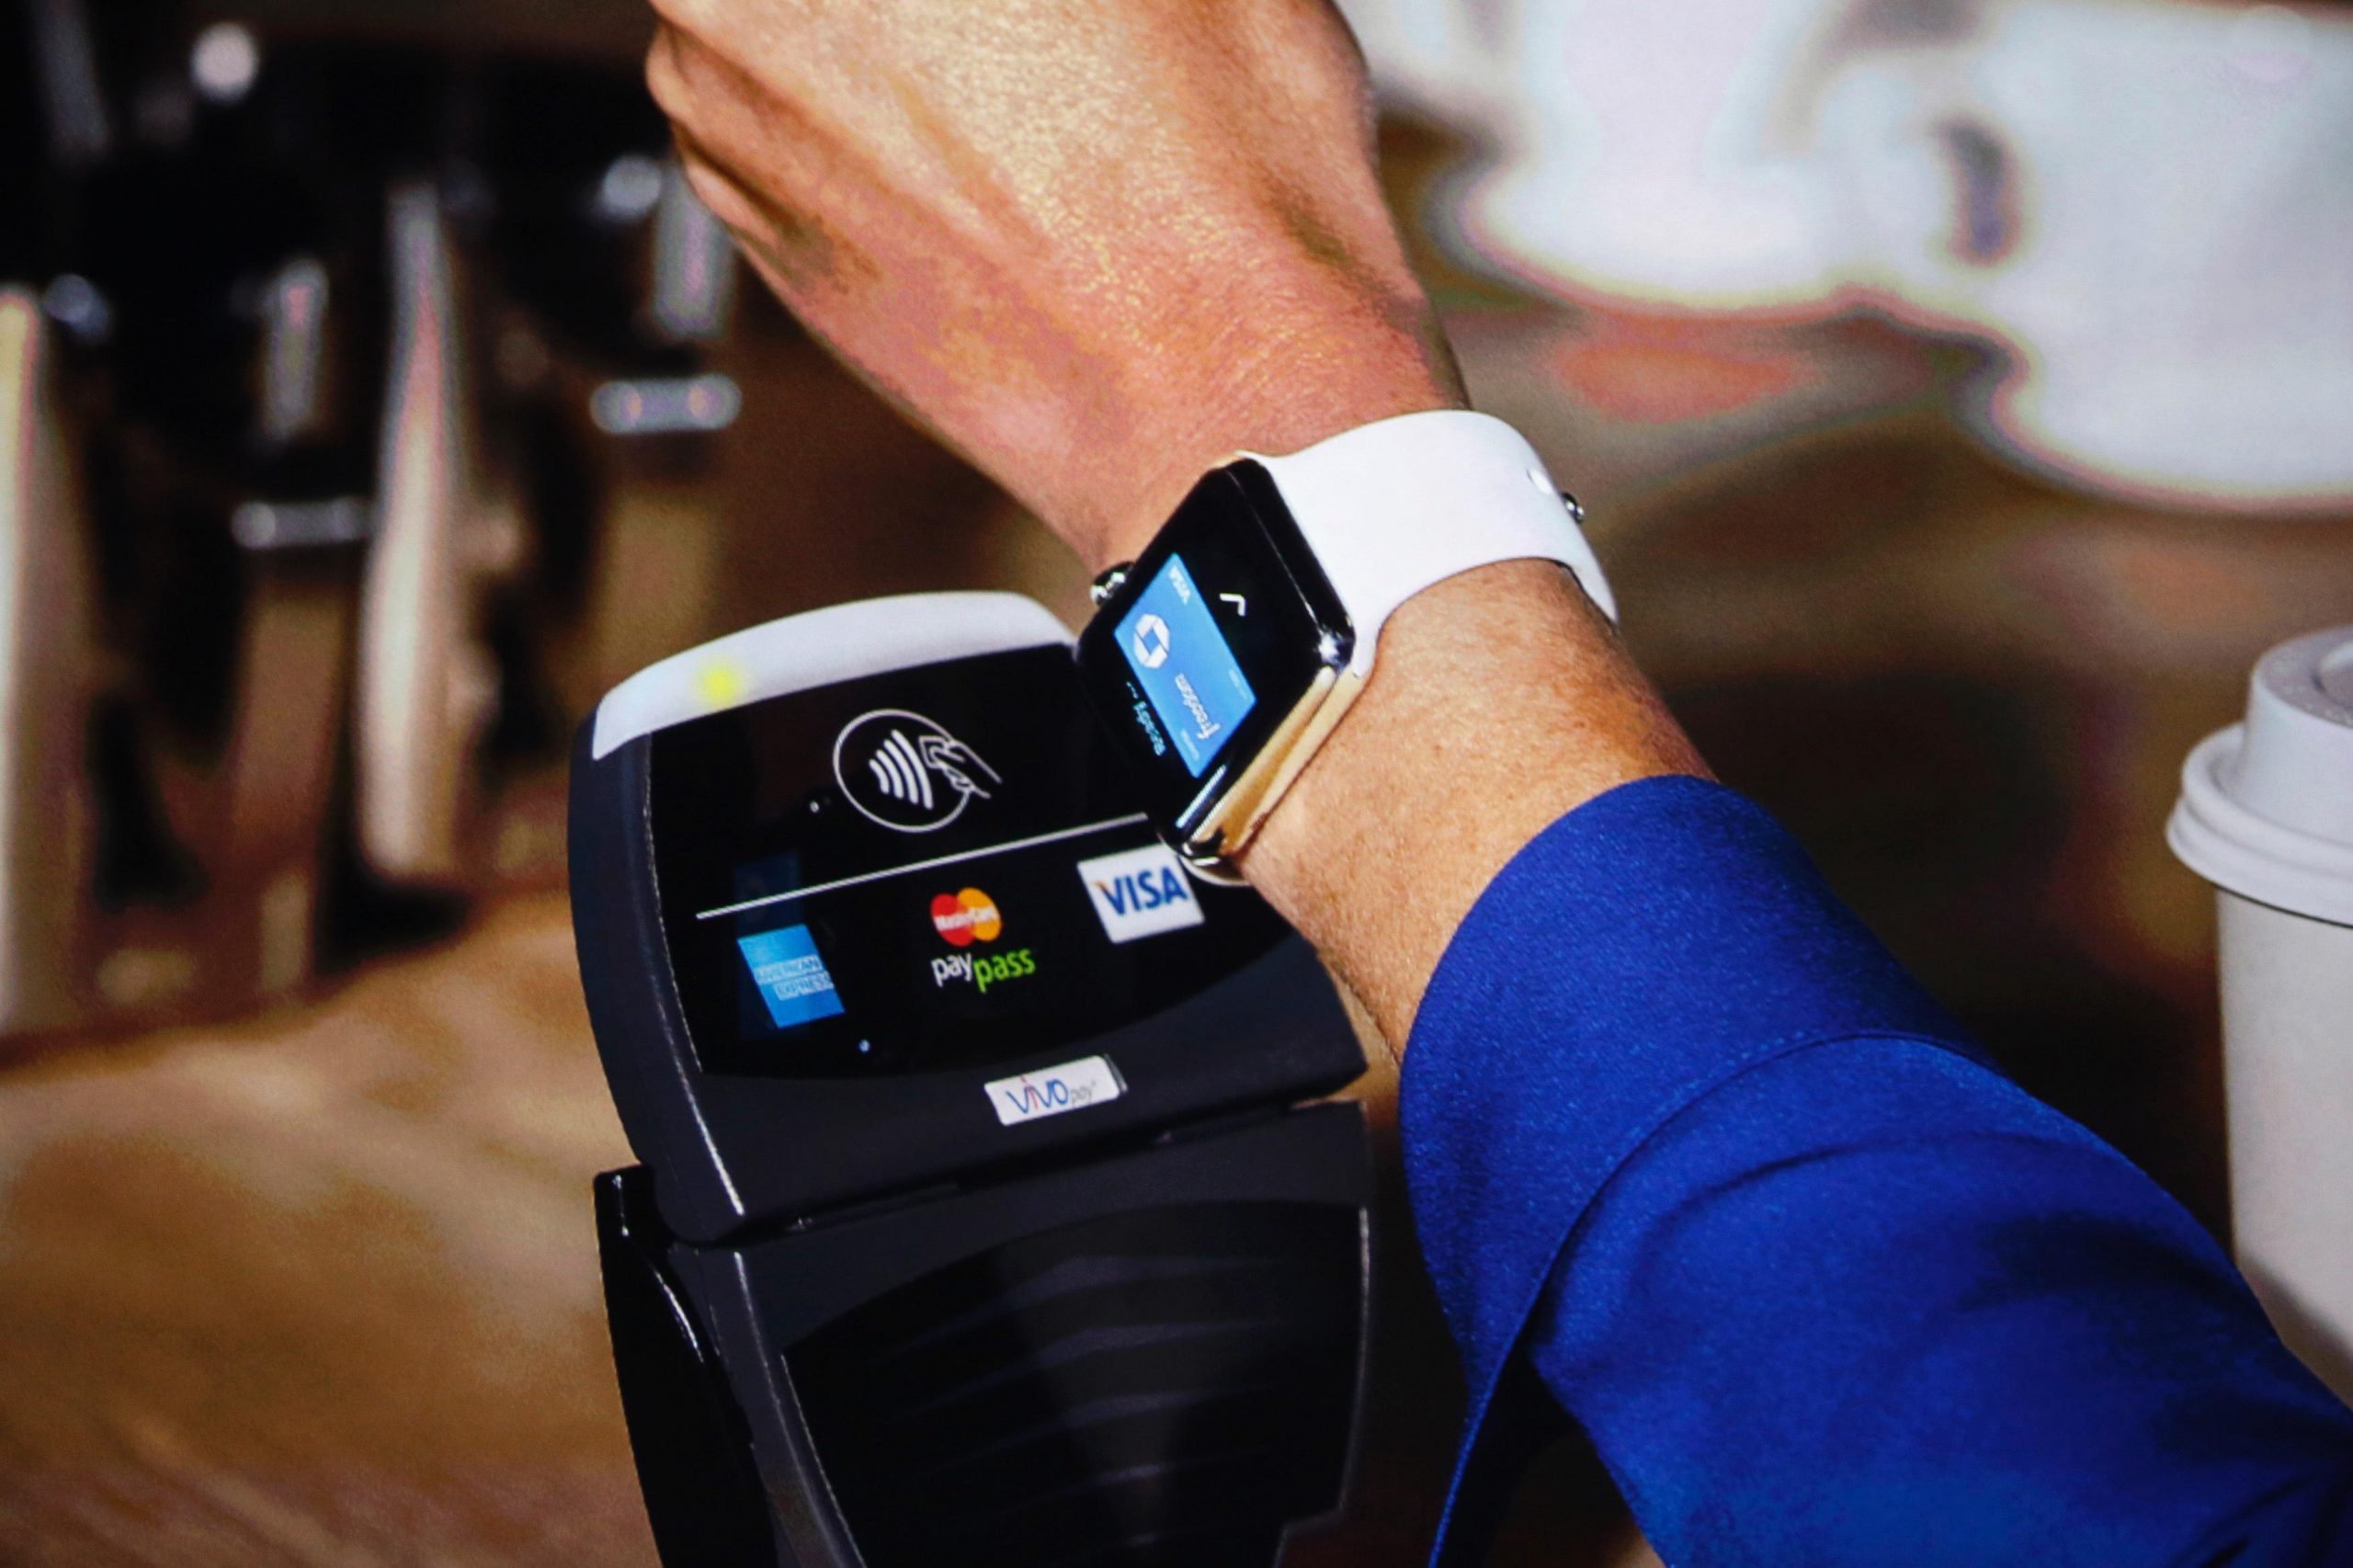 Europe to accuse Apple of anti-competitive practices over its NFC chip thumbnail